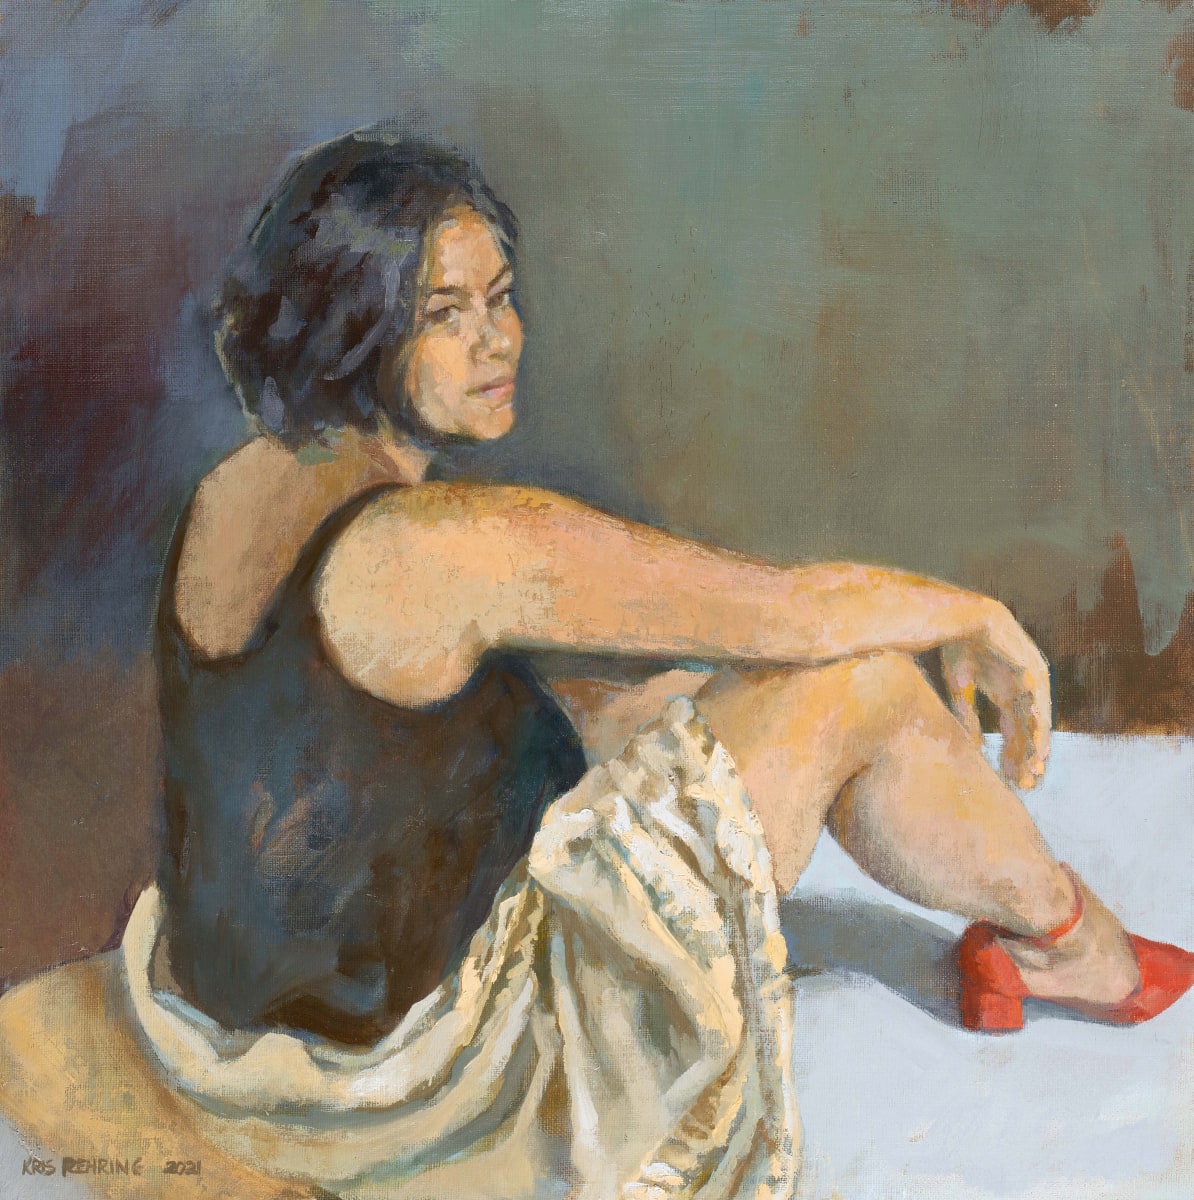 Gabby's Red Shoe by Kris Rehring 